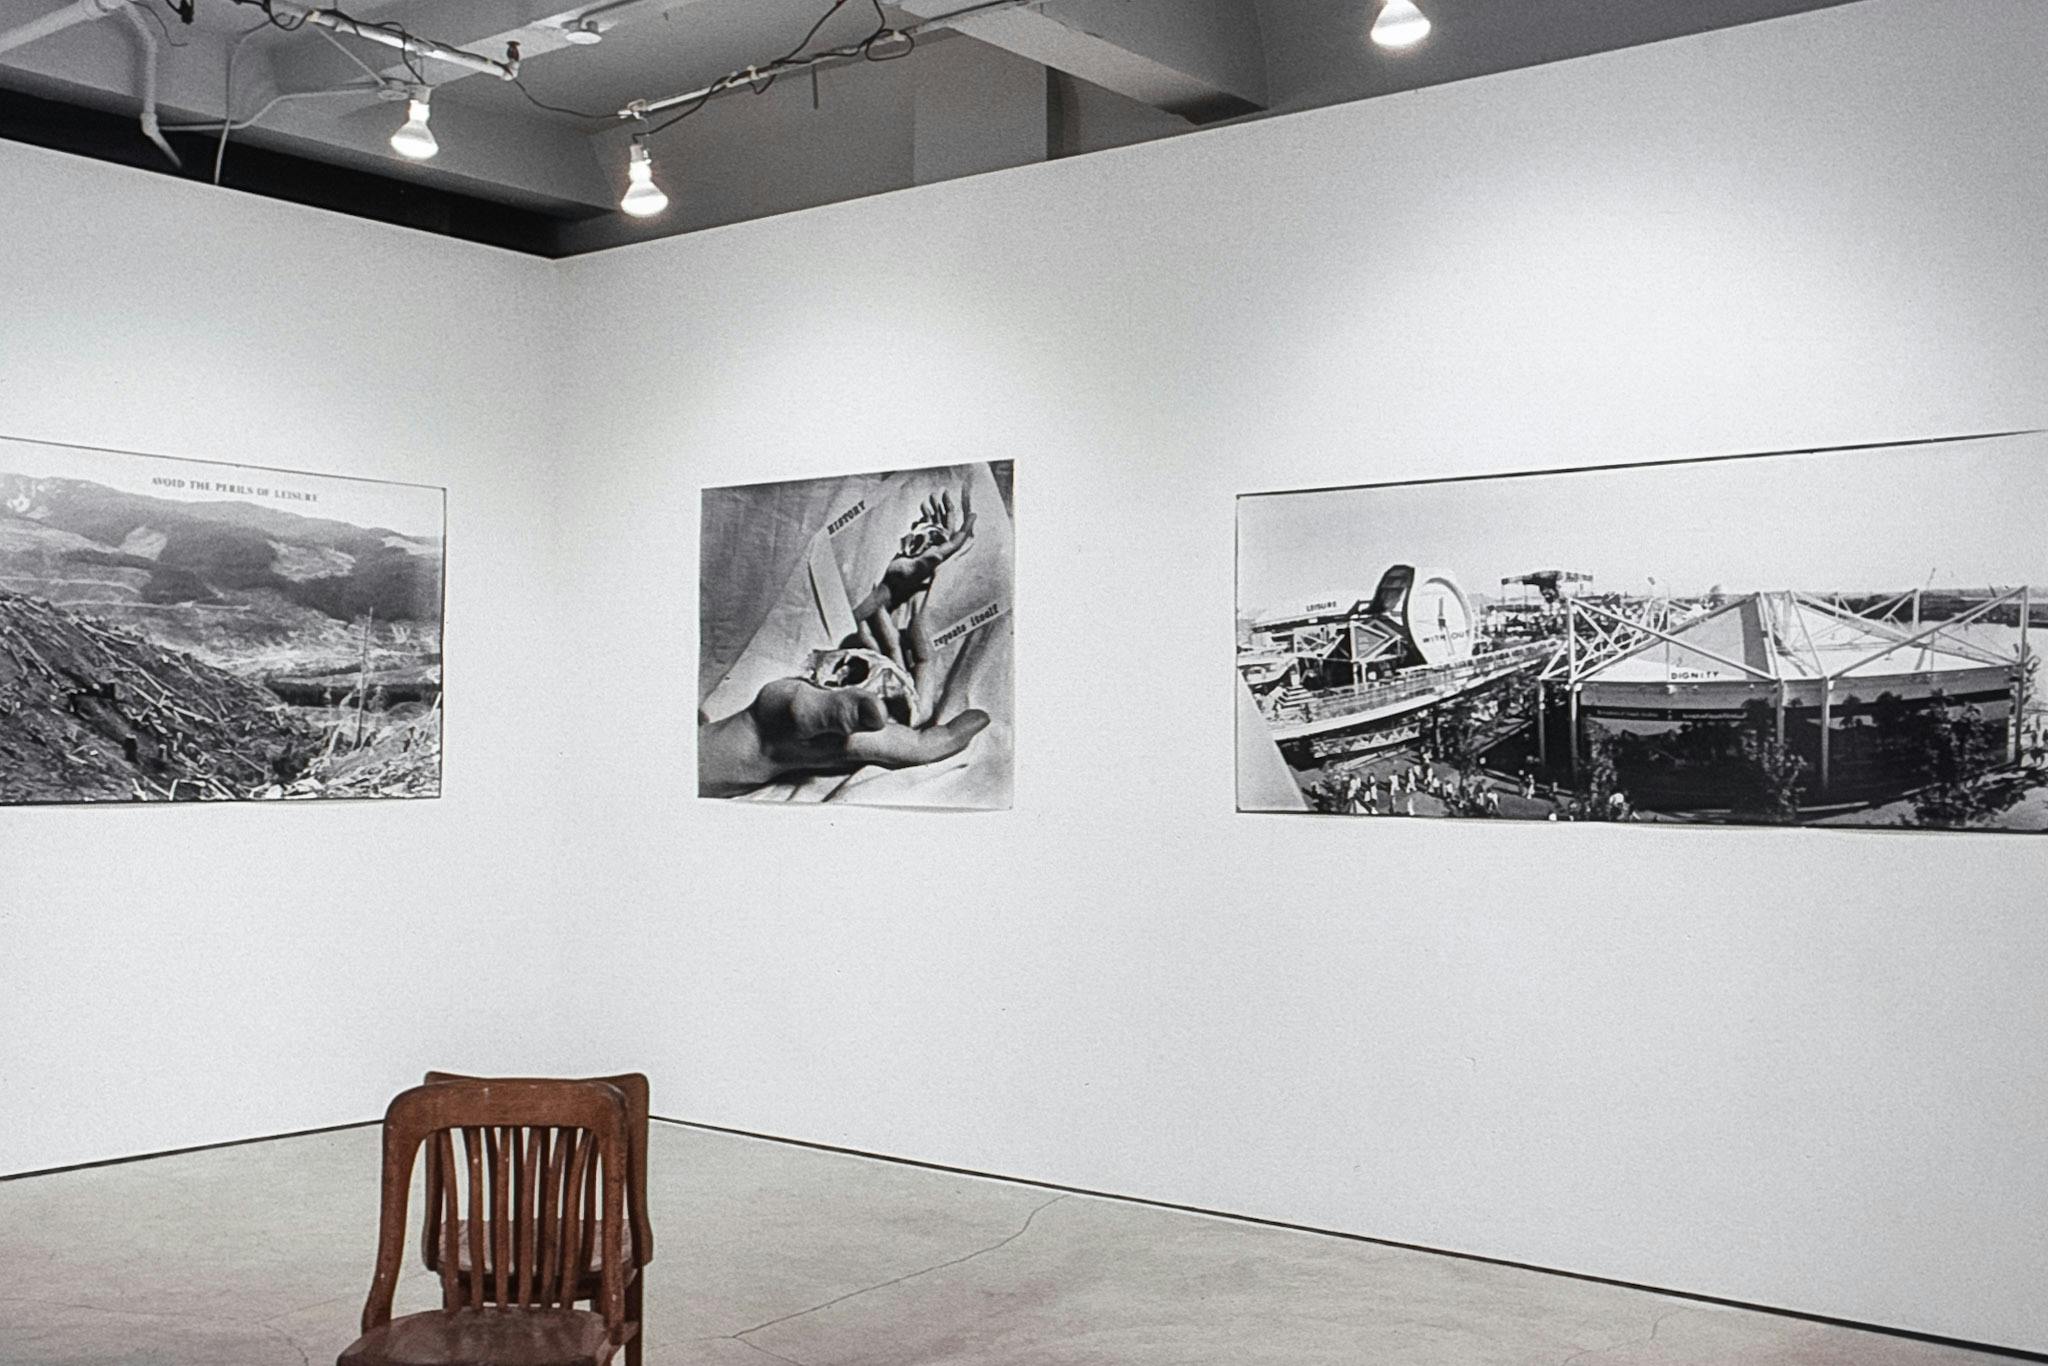 3 black and white photos on the walls of a gallery. The photos show a landscape, a collage of a hand holding a small object, and an arena. In the foreground there are 2 wooden chairs, back to back.